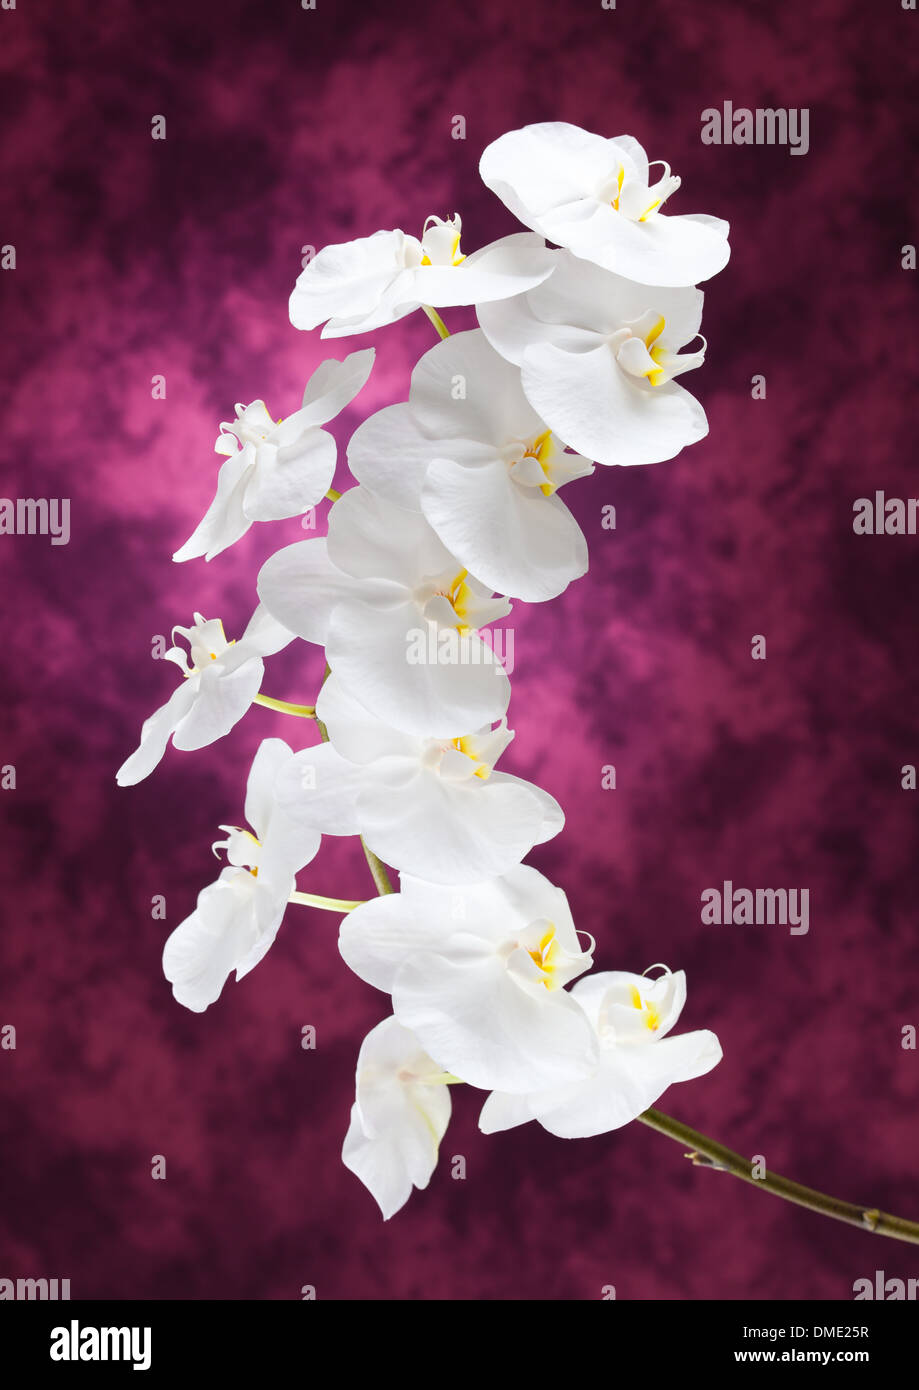 White orchid flowers on purple background Stock Photo